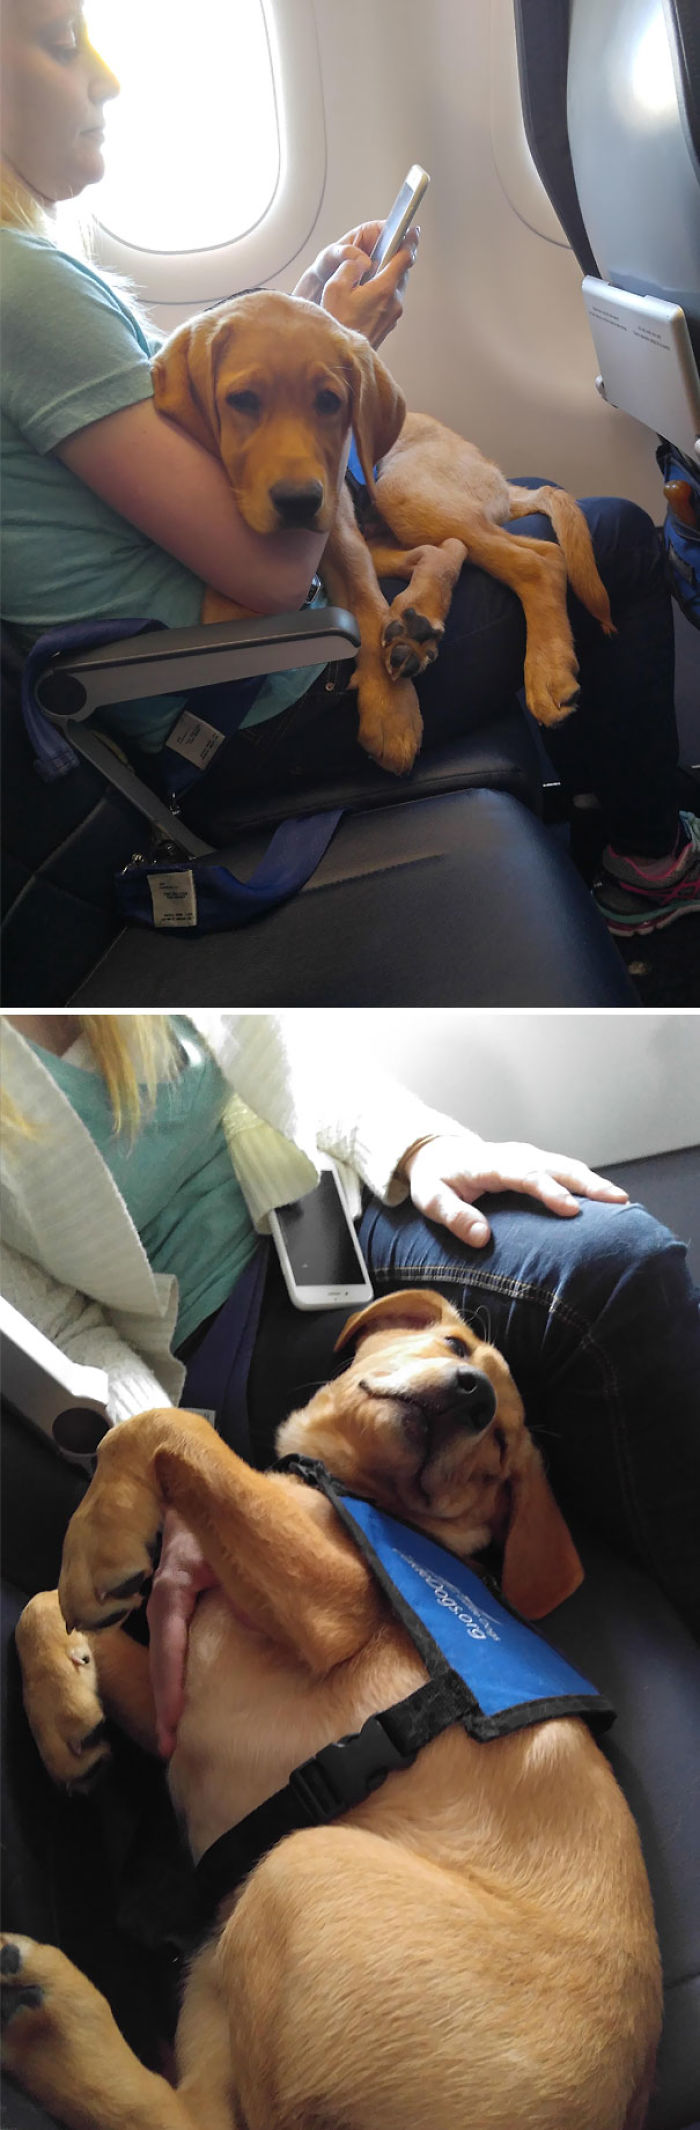 Licked, Kicked And Sniffed On Plane Flight